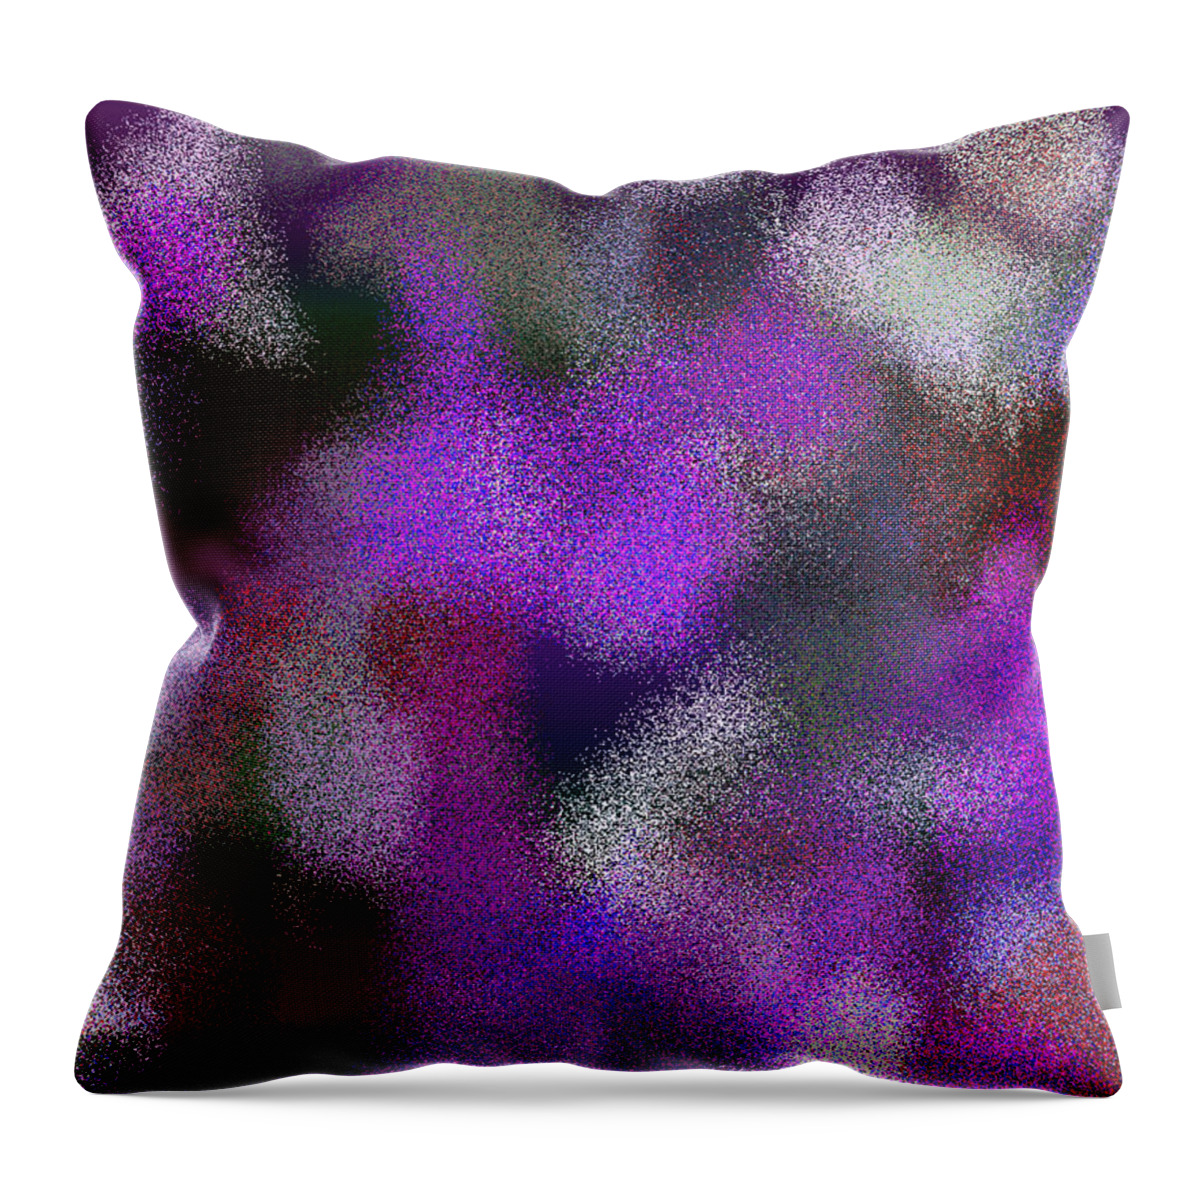 Abstract Throw Pillow featuring the digital art T.1.729.46.4x3.5120x3840 by Gareth Lewis